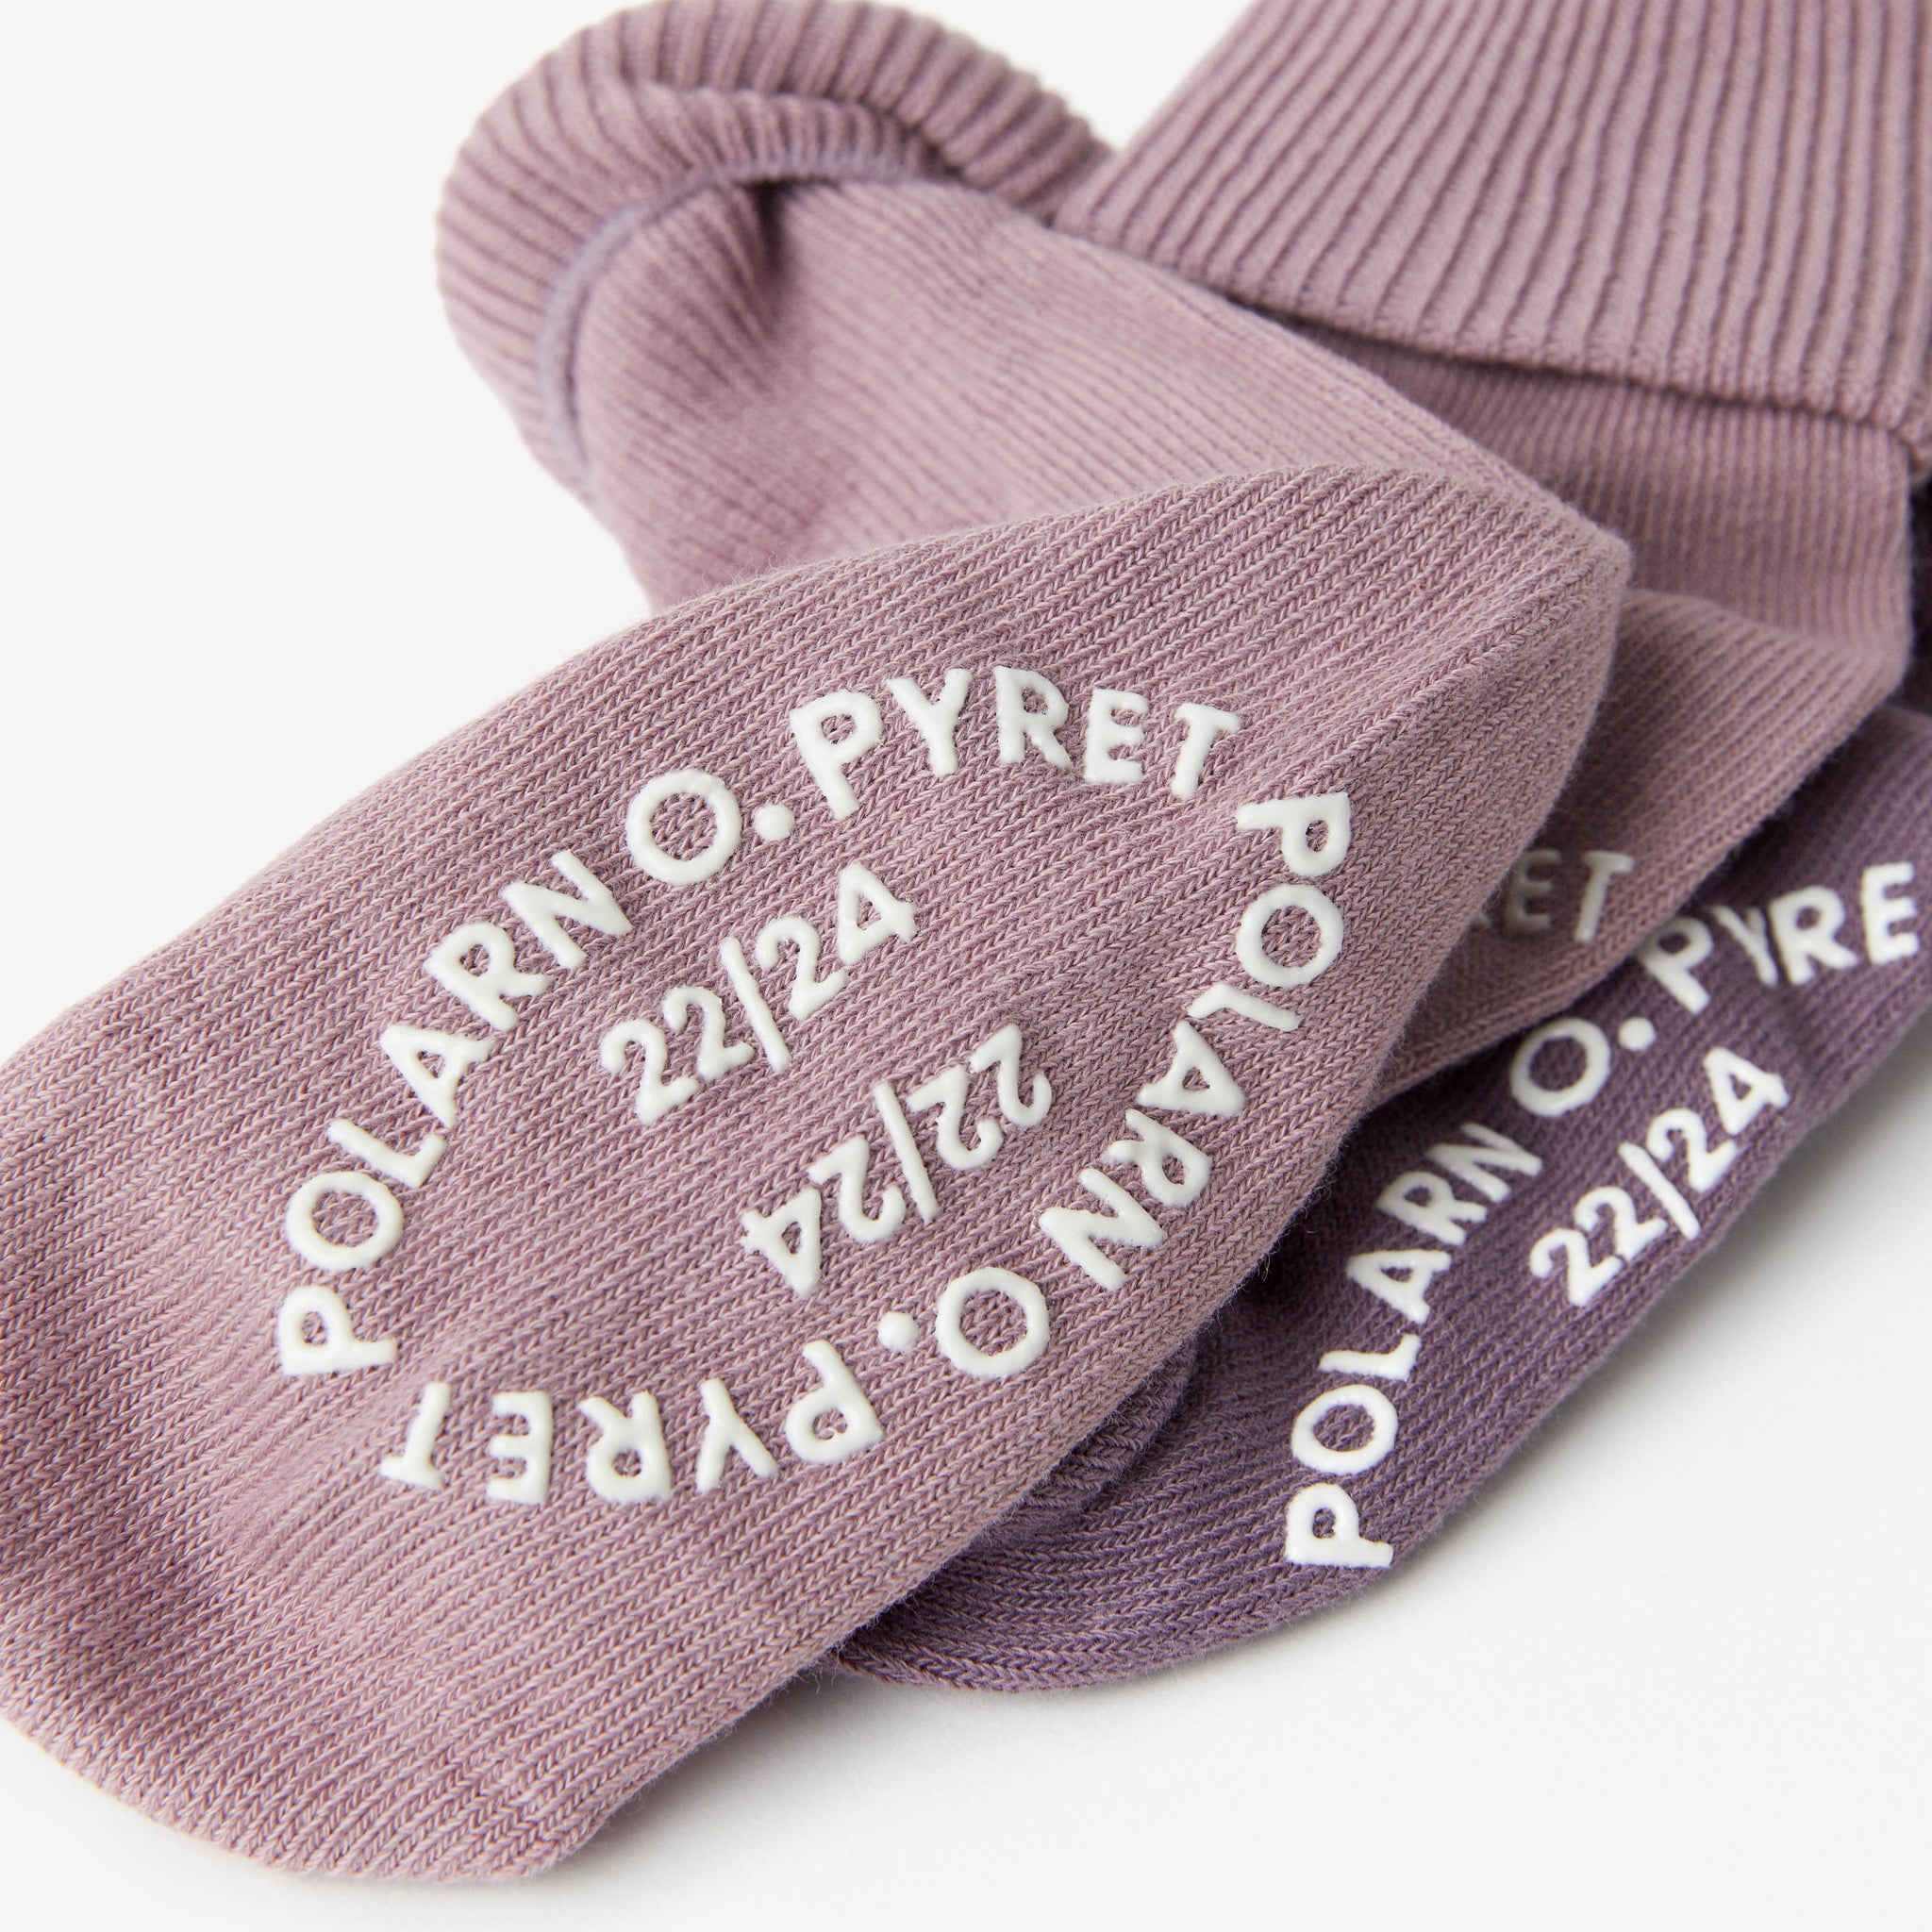 Purple Antislip Kids Socks Multipack from the Polarn O. Pyret kidswear collection. Ethically produced kids clothing.